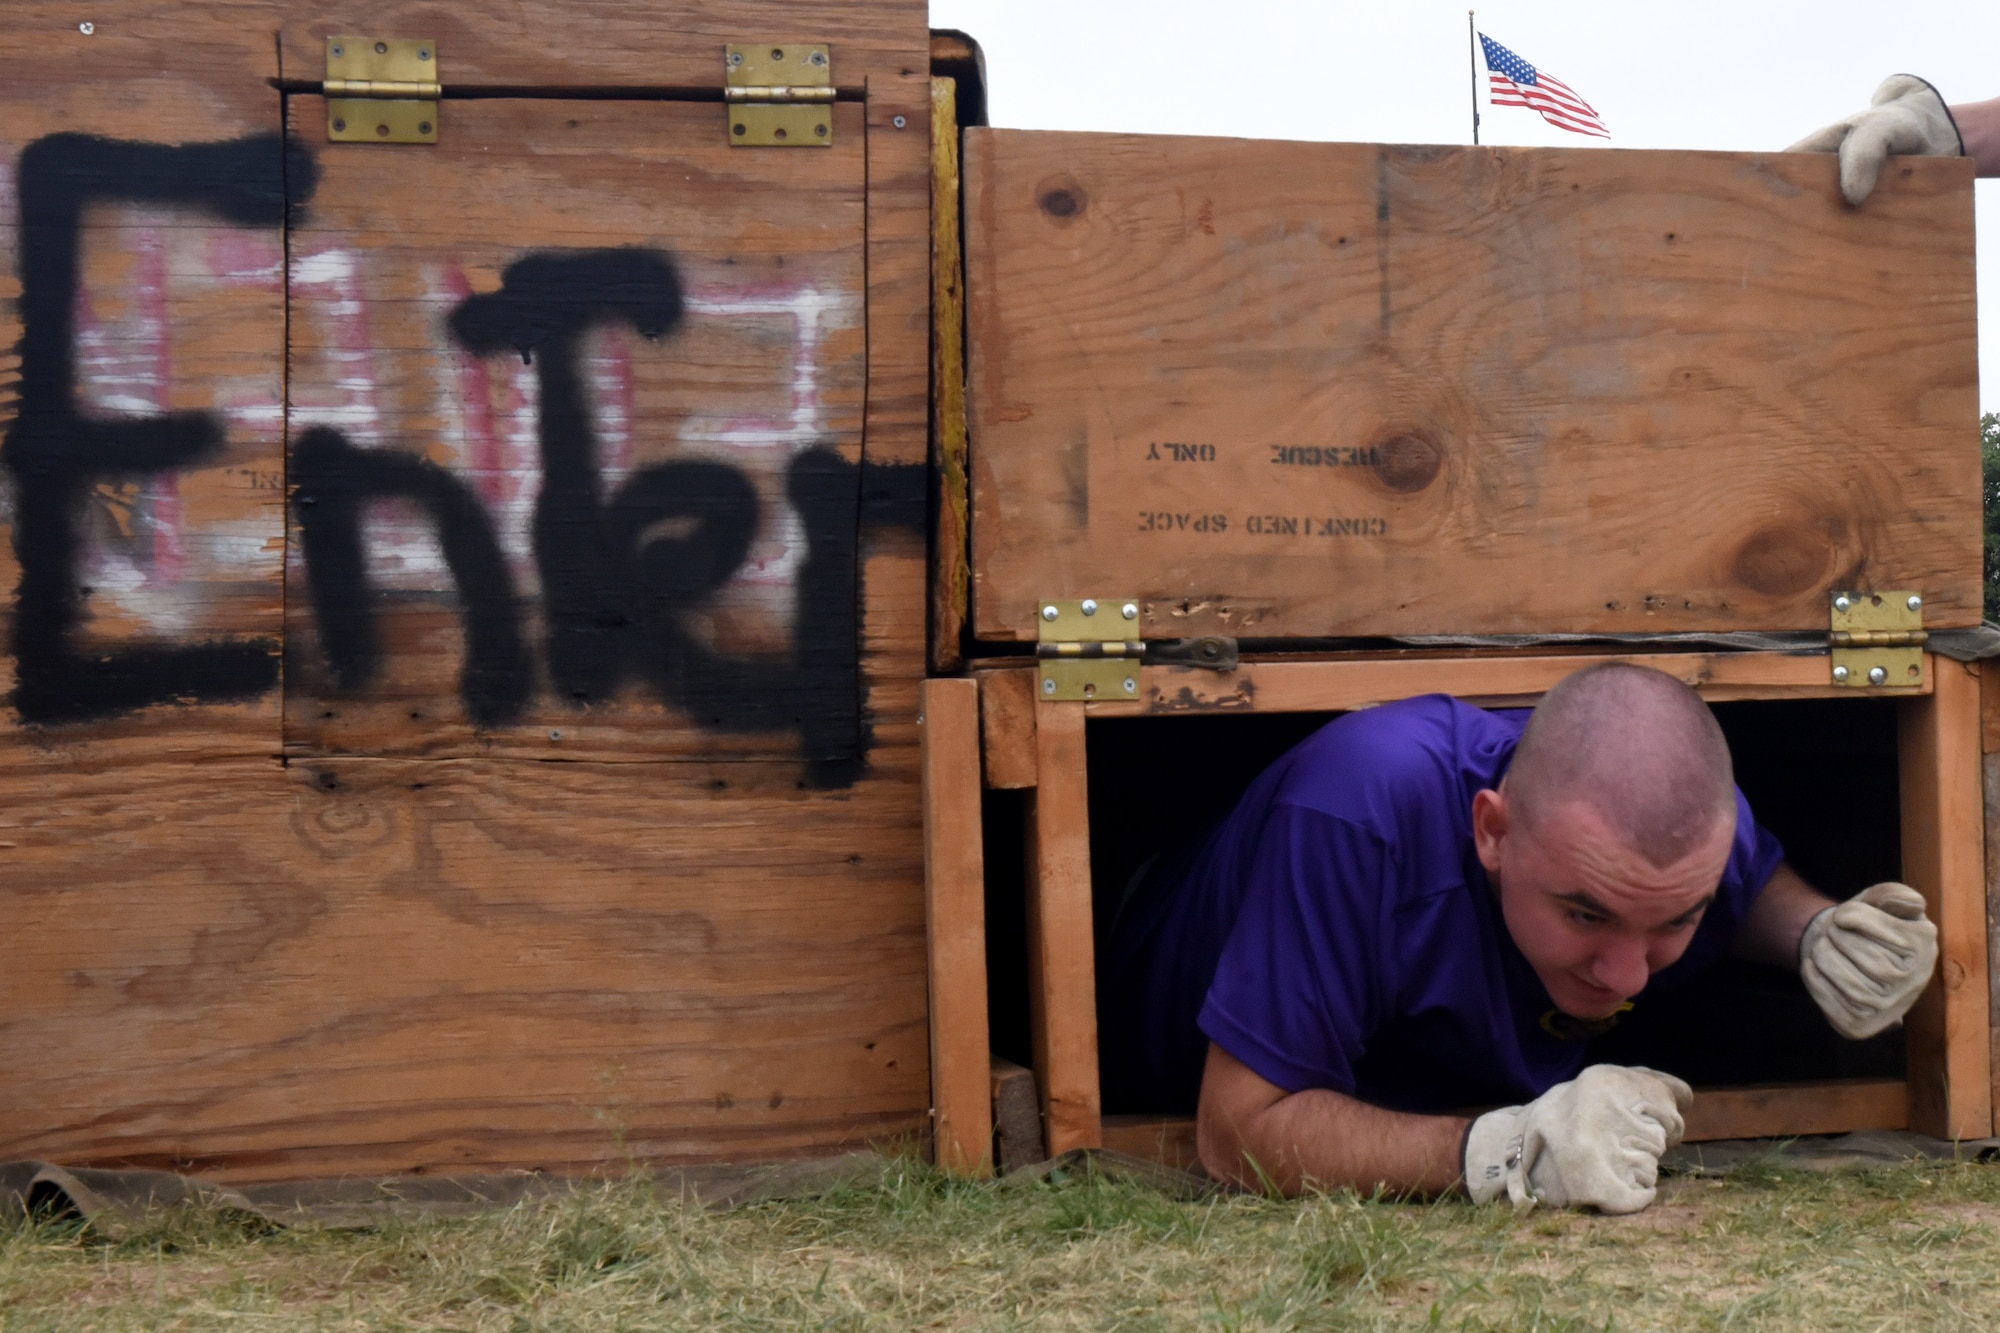 U.S. Air Force Senior Airman Randall Moose, 17th Training Wing Public Affairs photojournalist, exits an obstacle during the 13th Annual Fire Muster on Goodfellow Air Force Base, Texas, Oct. 12, 2018. Moose had to enter through the left side of the confined space trainer and traverse a series of beams in darkness to exit out the other side. (U.S. Air Force photo by 2nd Lt. Matthew Stott/Released)